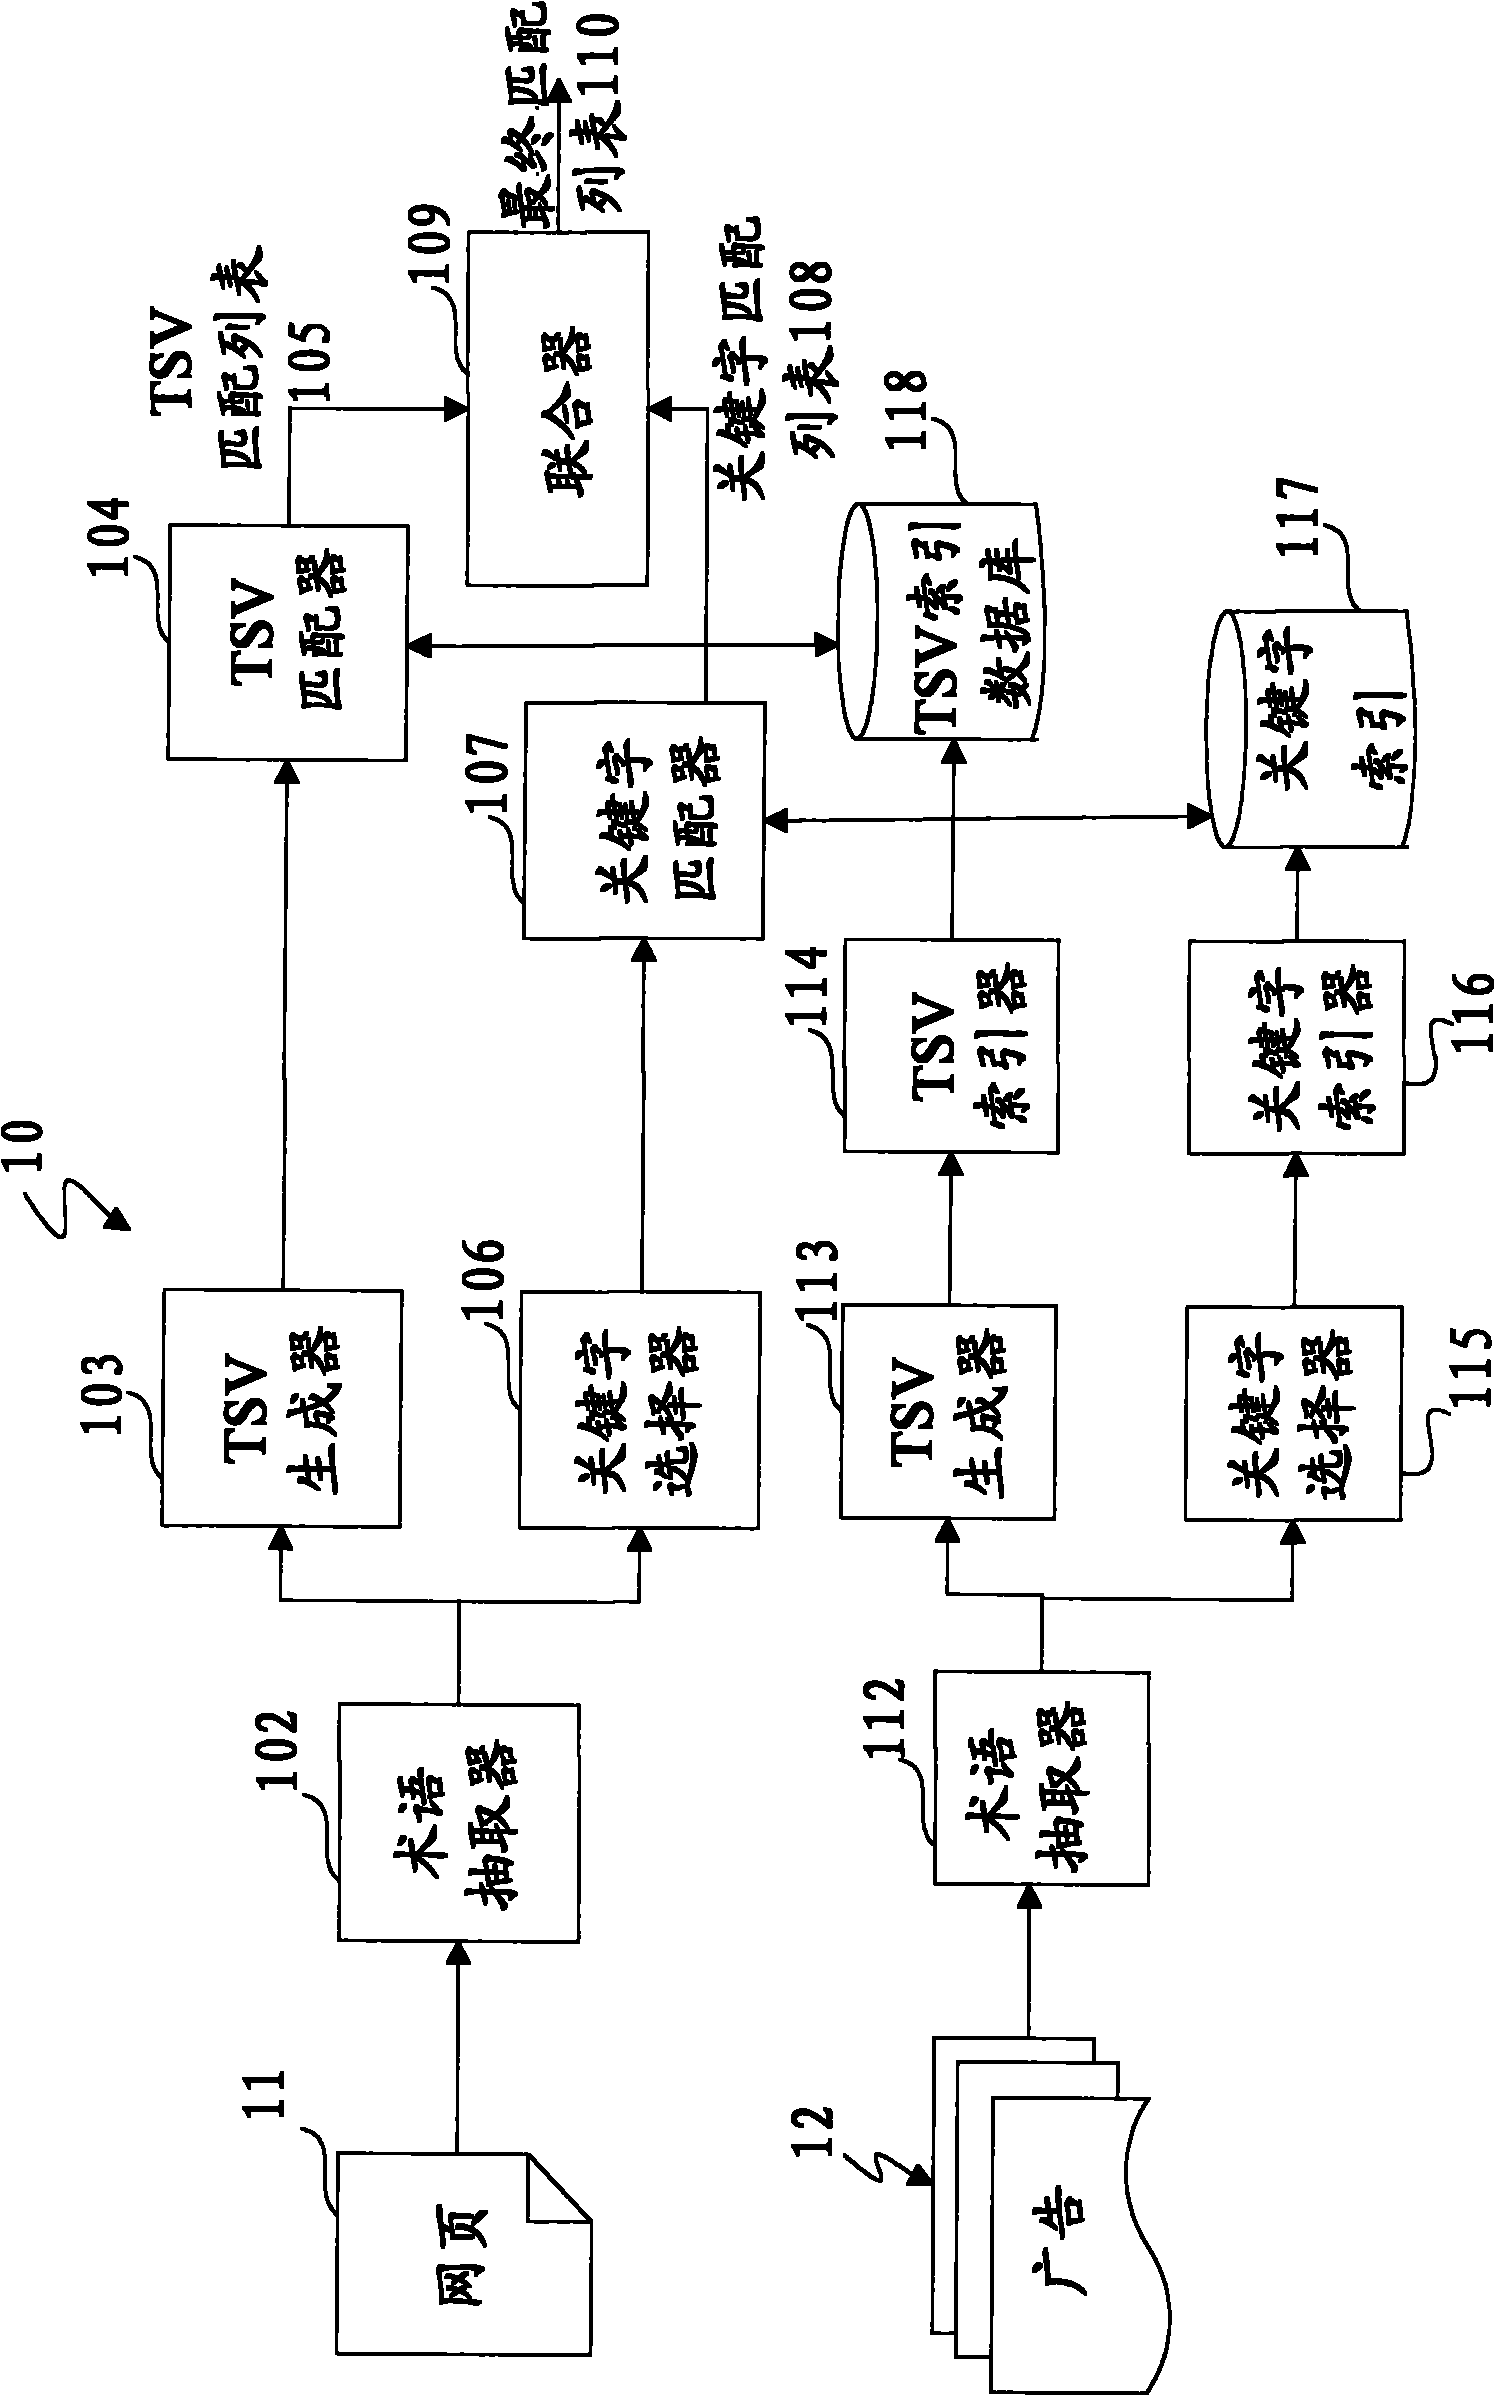 Method and apparatus for relating datasets by using semantic vectors and keyword analyses